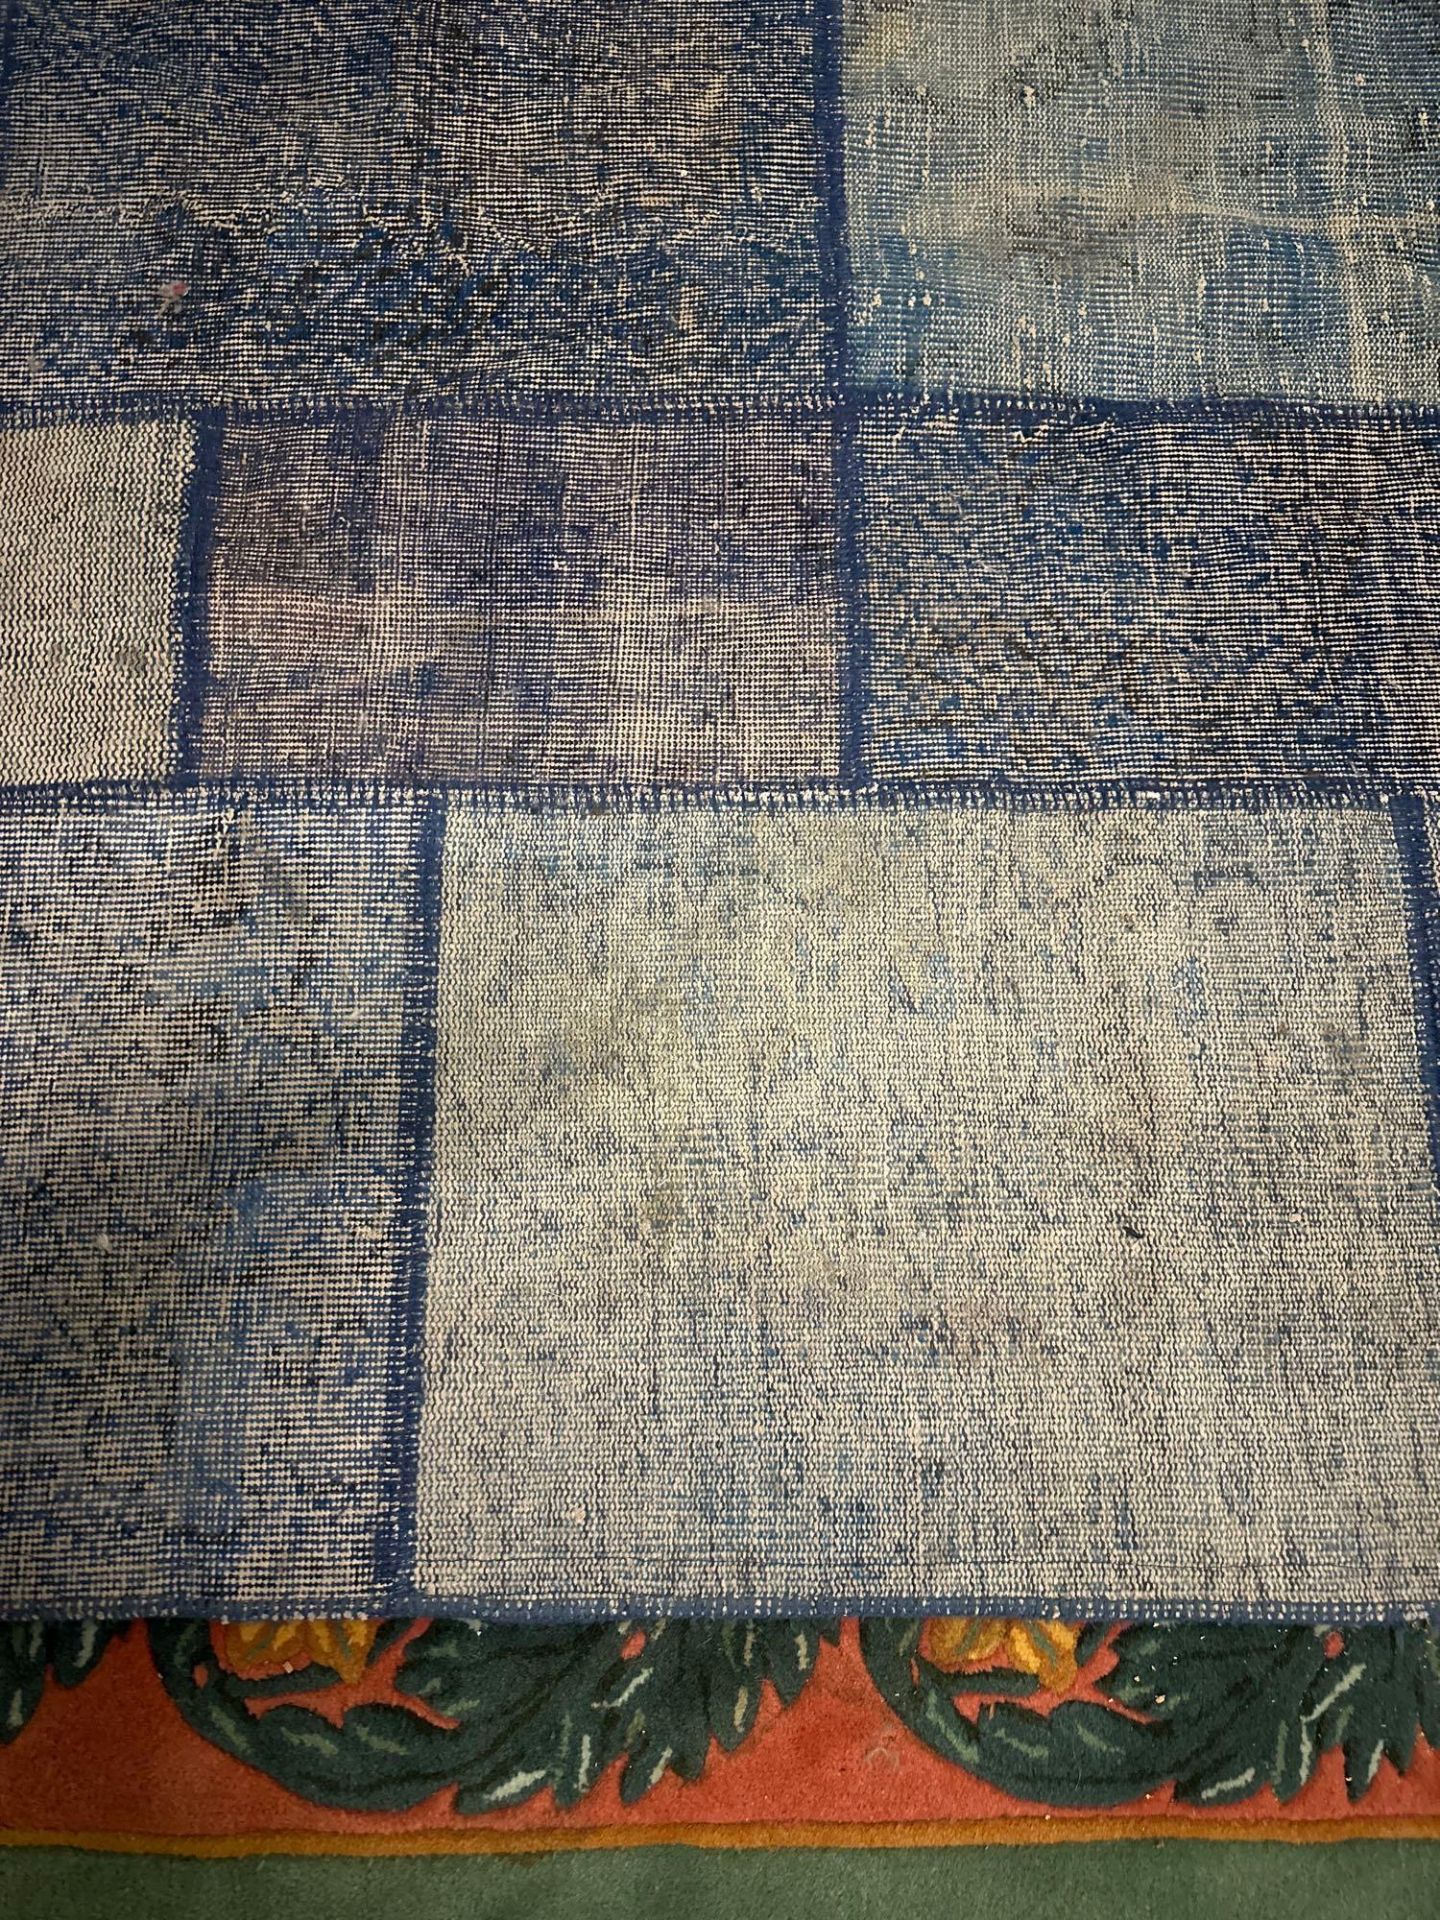 Multicolour Overdyed Patchwork Blue Patterned Rug 198 X 298 cm - Image 4 of 5